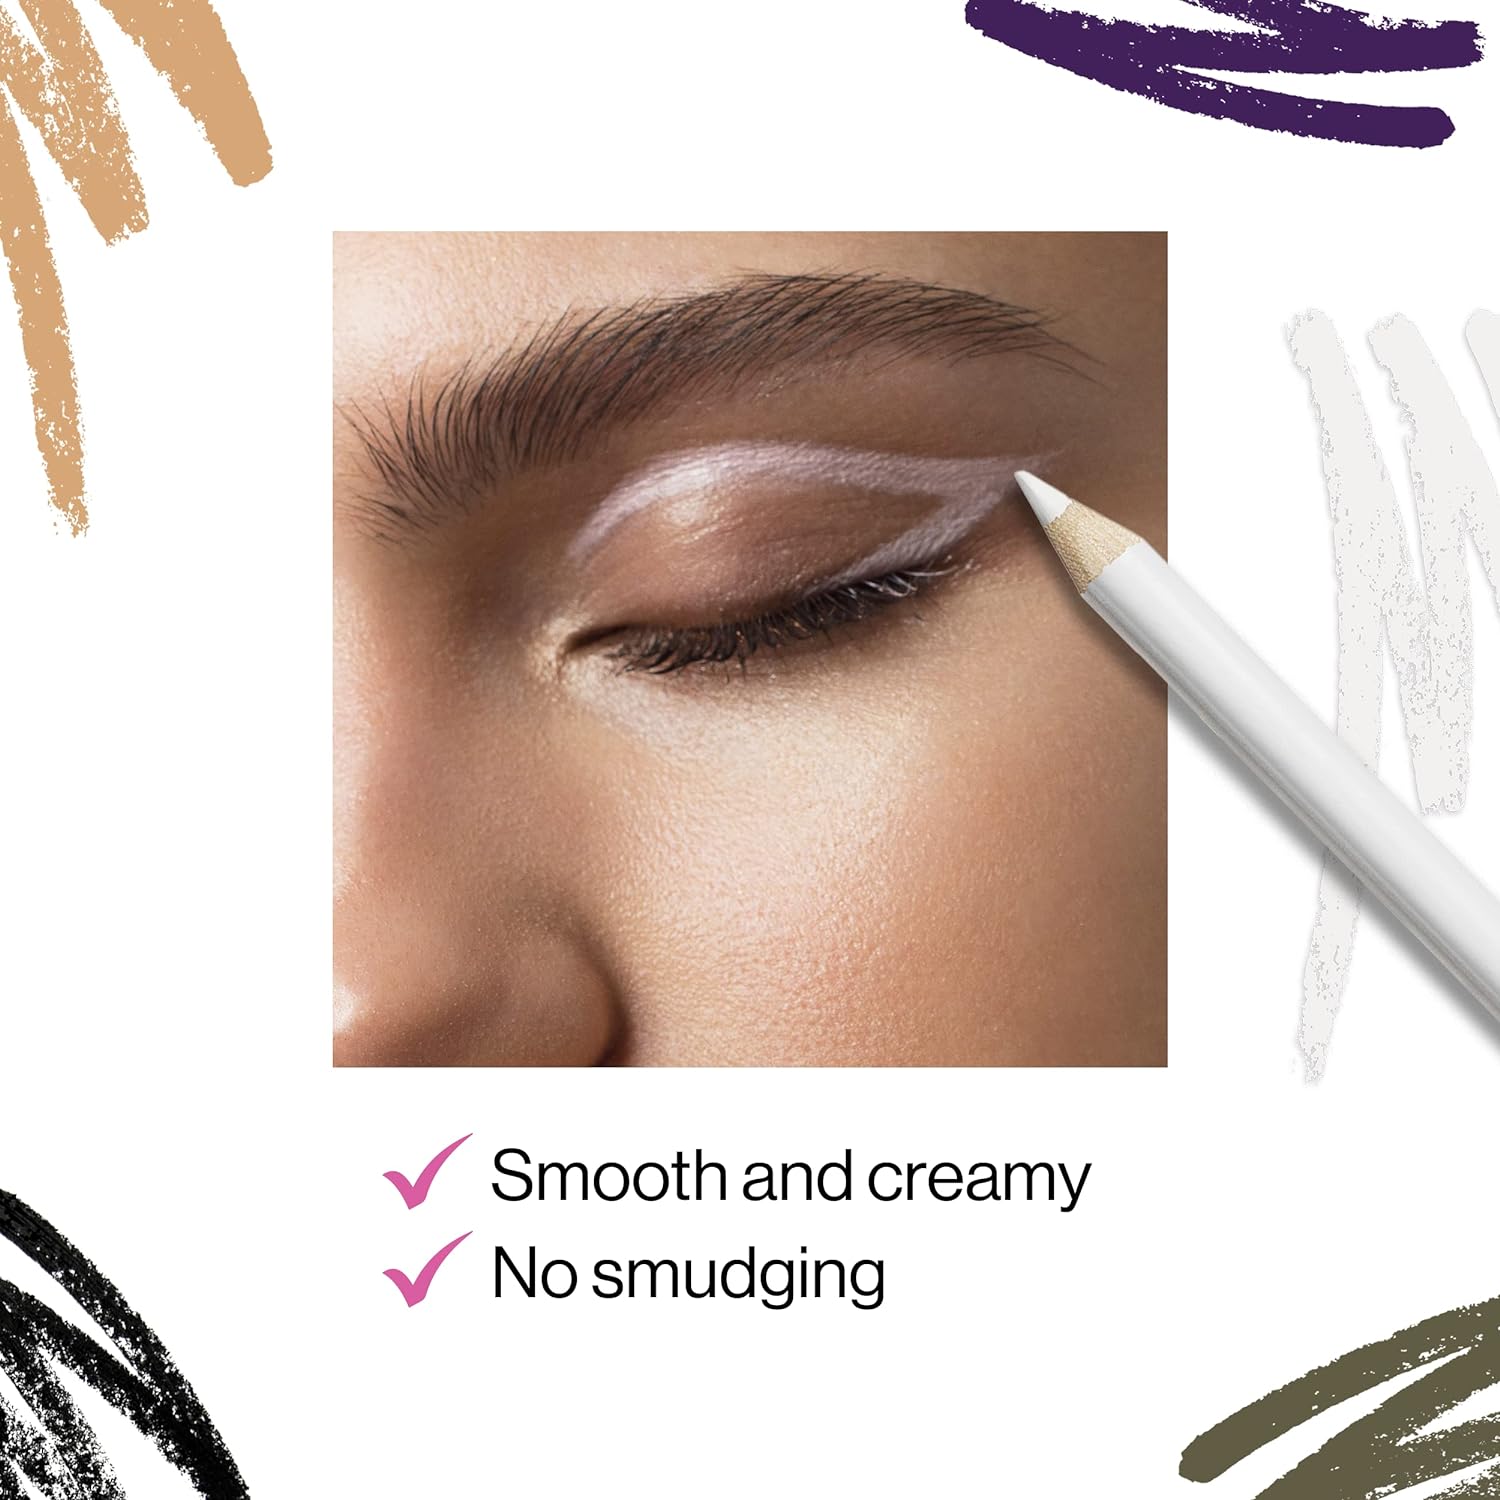 Wet n Wild Color Icon Kohl Eyeliner Pencil Black, Long Lasting, Highly Pigmented, No Smudging, Smooth Soft Gliding, Eye Liner Makeup, Baby's Got Black - Premium eyeliner from Concordia Style Boutique - Just $3! Shop now at Concordia Style Boutique